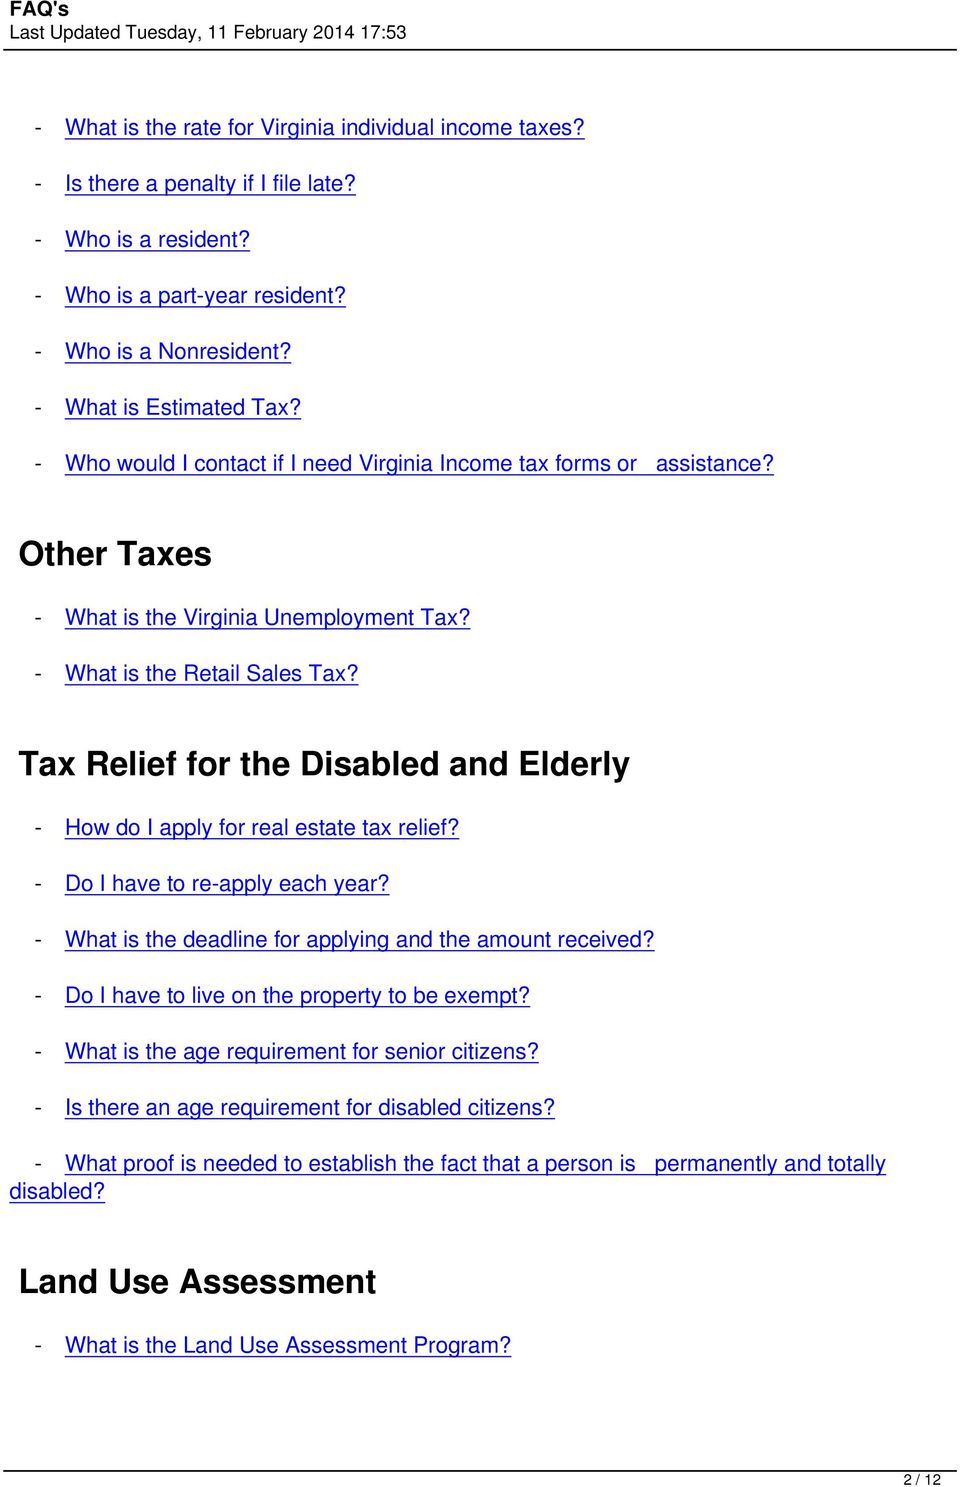 Tax Relief for the Disabled and Elderly - How do I apply for real estate tax relief? - Do I have to re-apply each year? - What is the deadline for applying and the amount received?